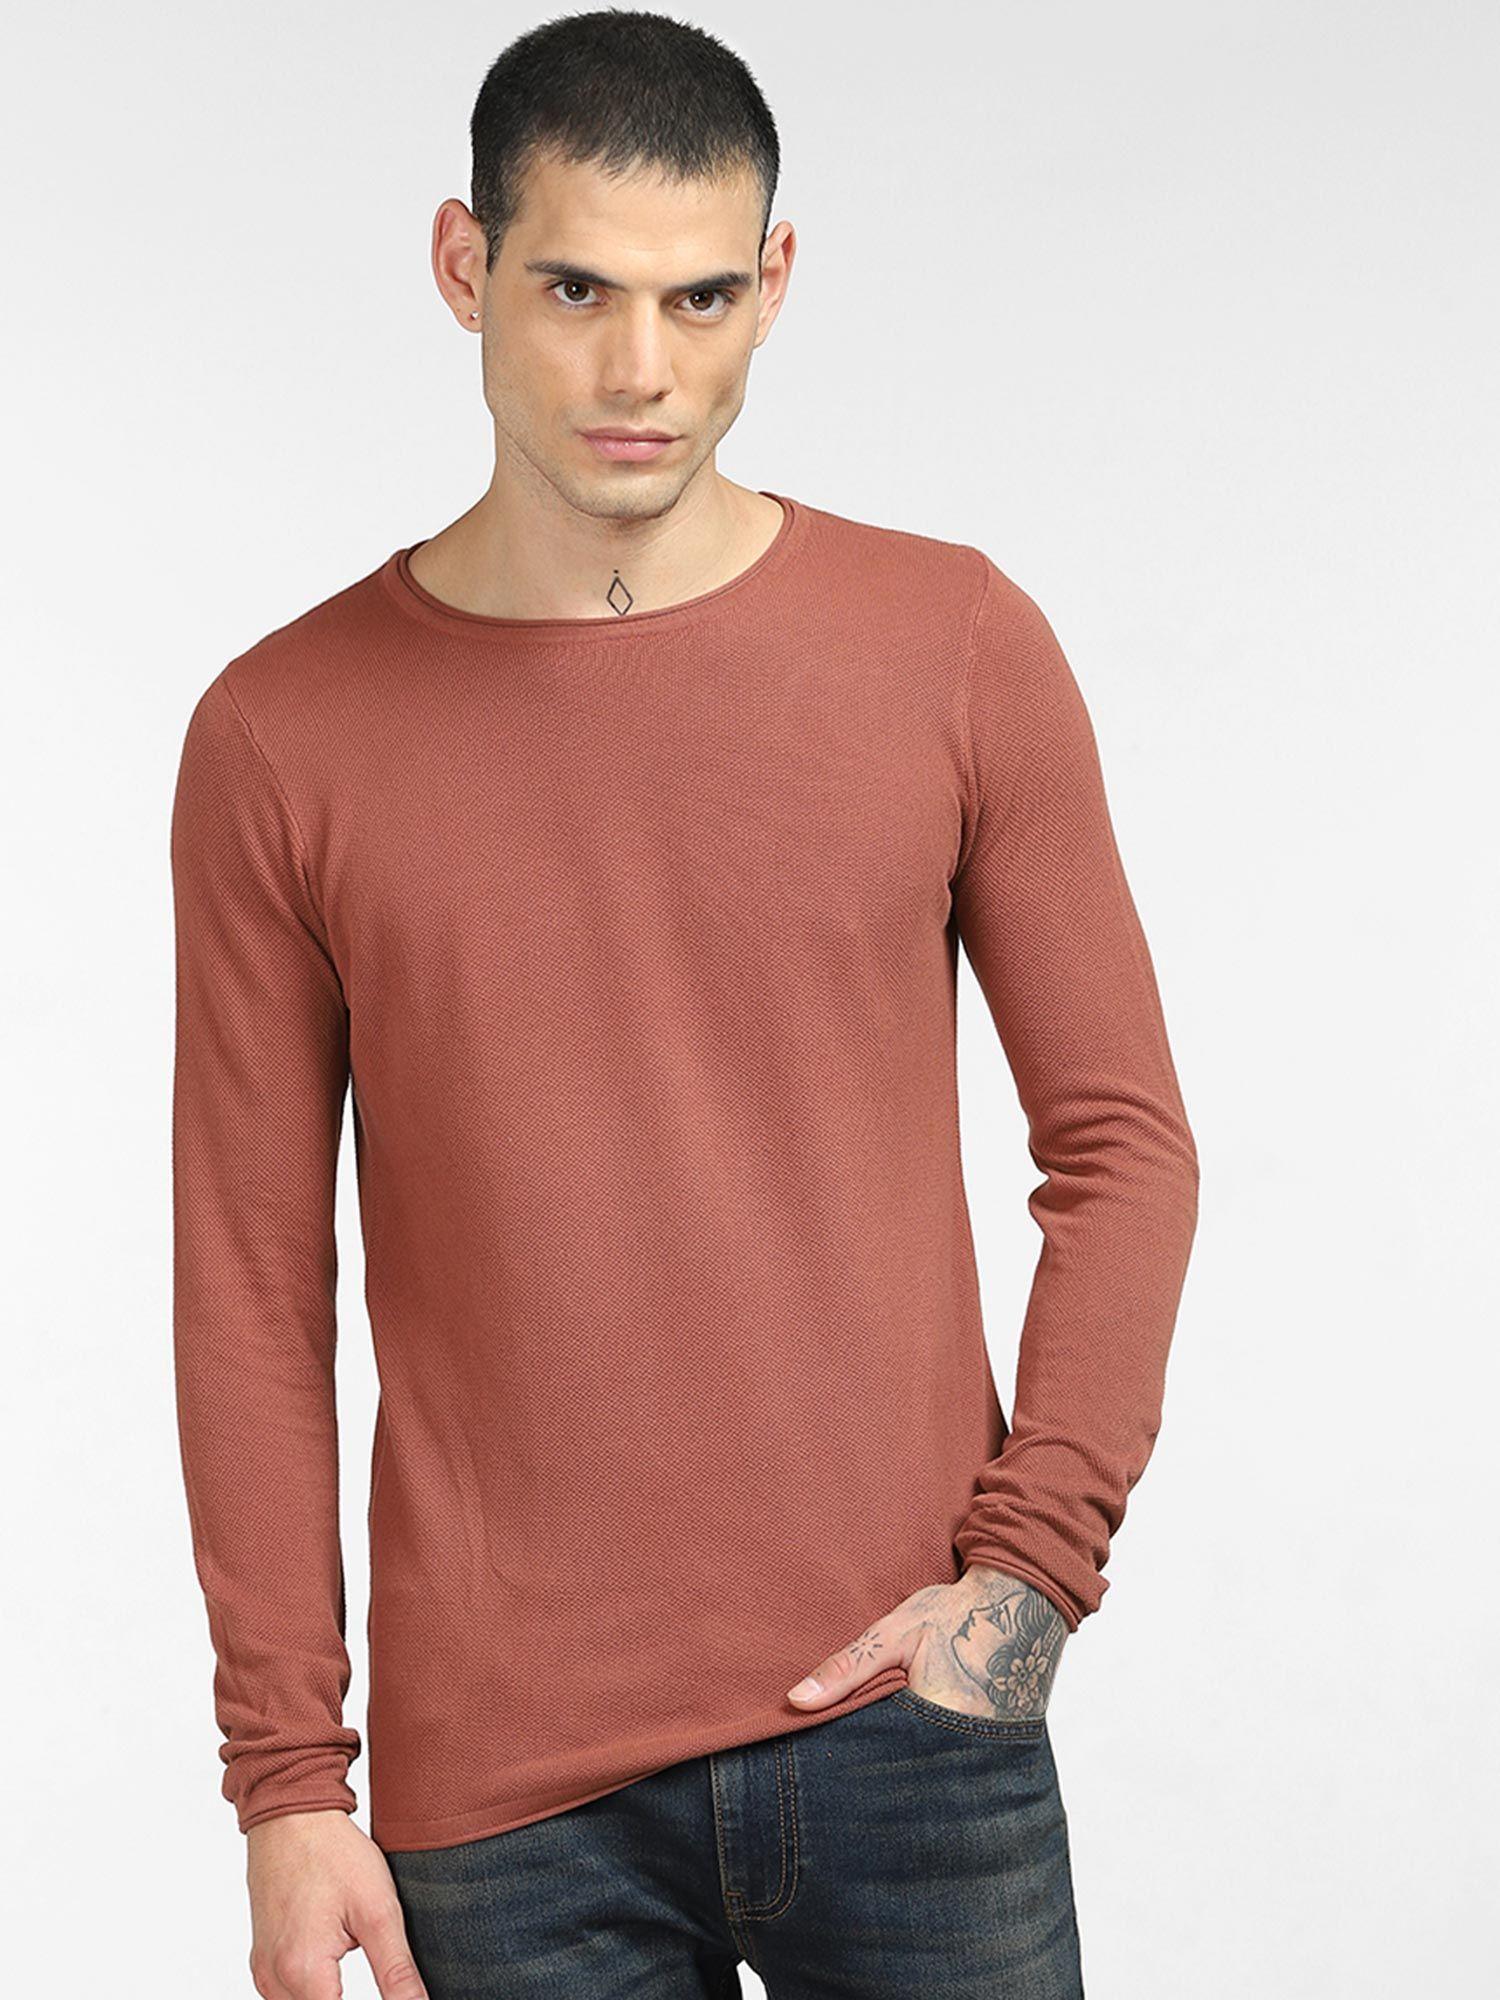 brown-pullover